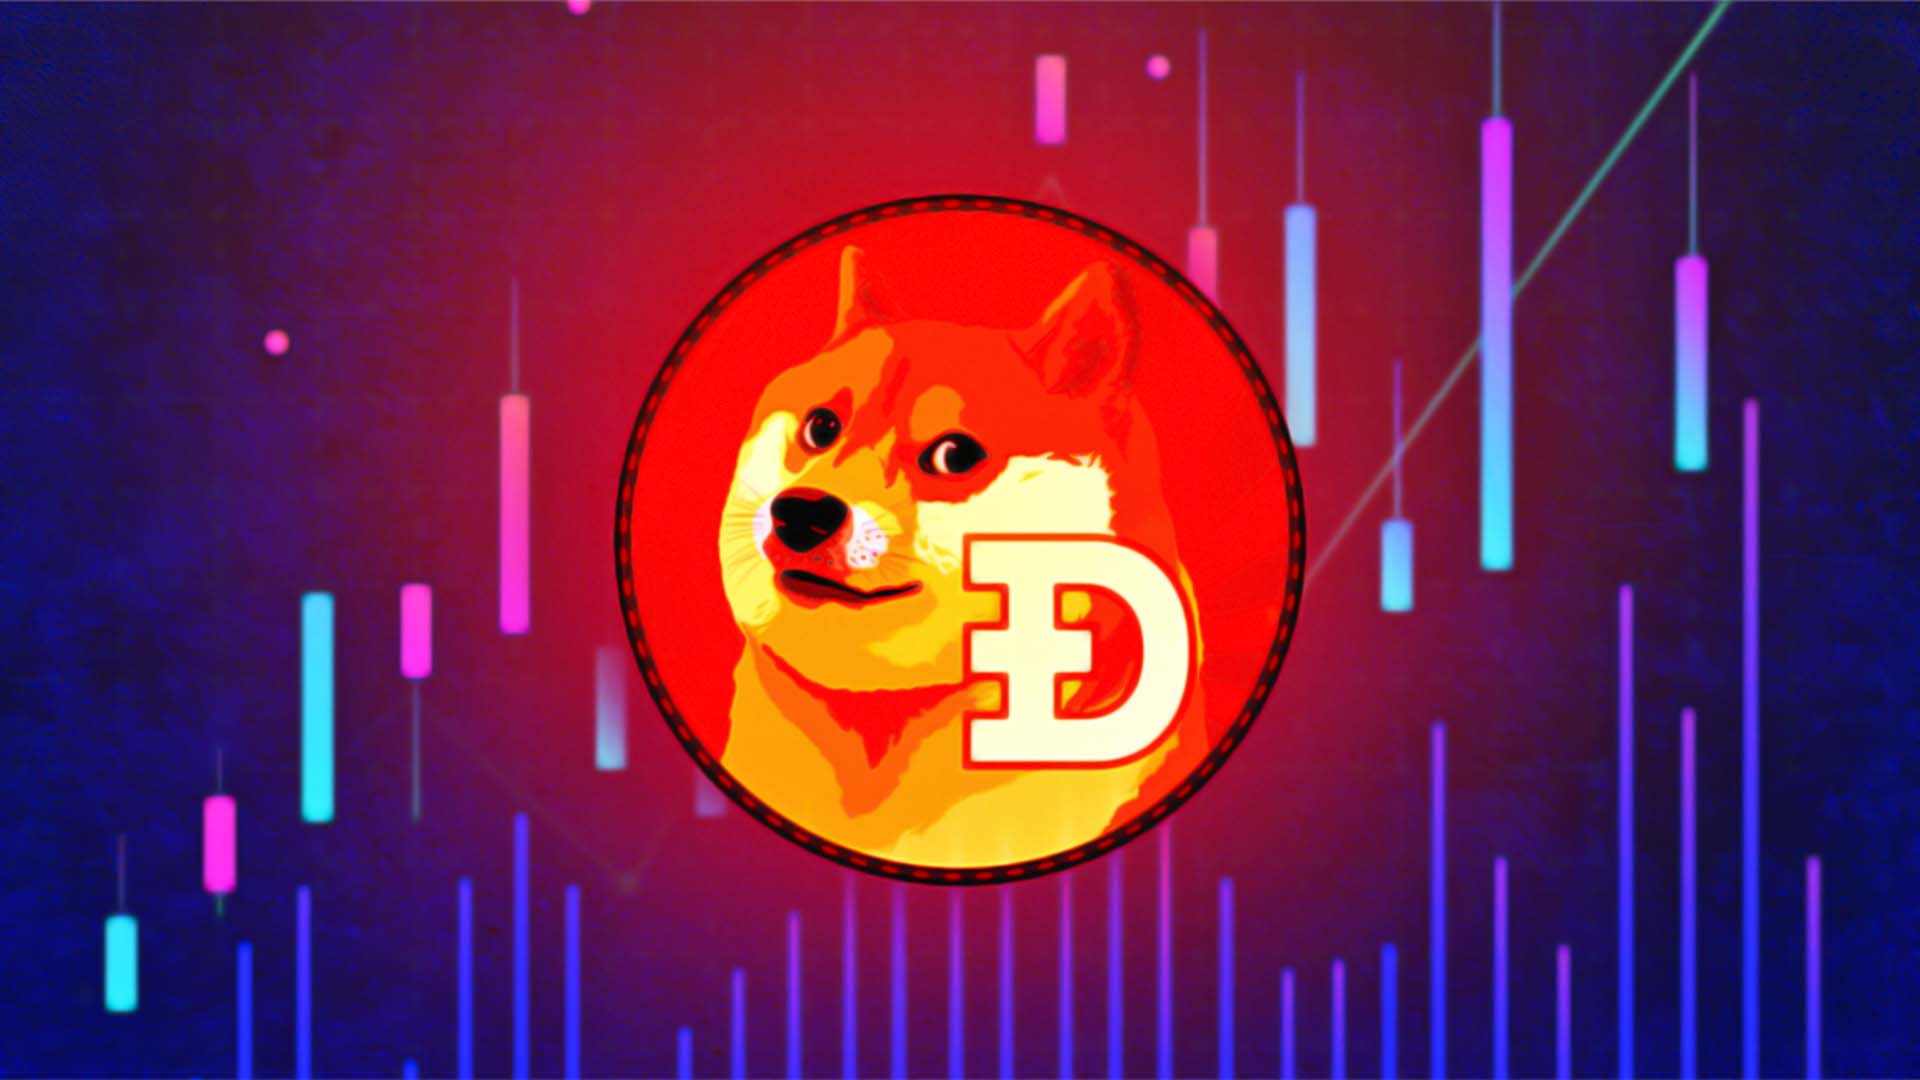 Dogecoin Price Prediction 2023: Will DOGE Price Surge towards $1.00 in 2023?